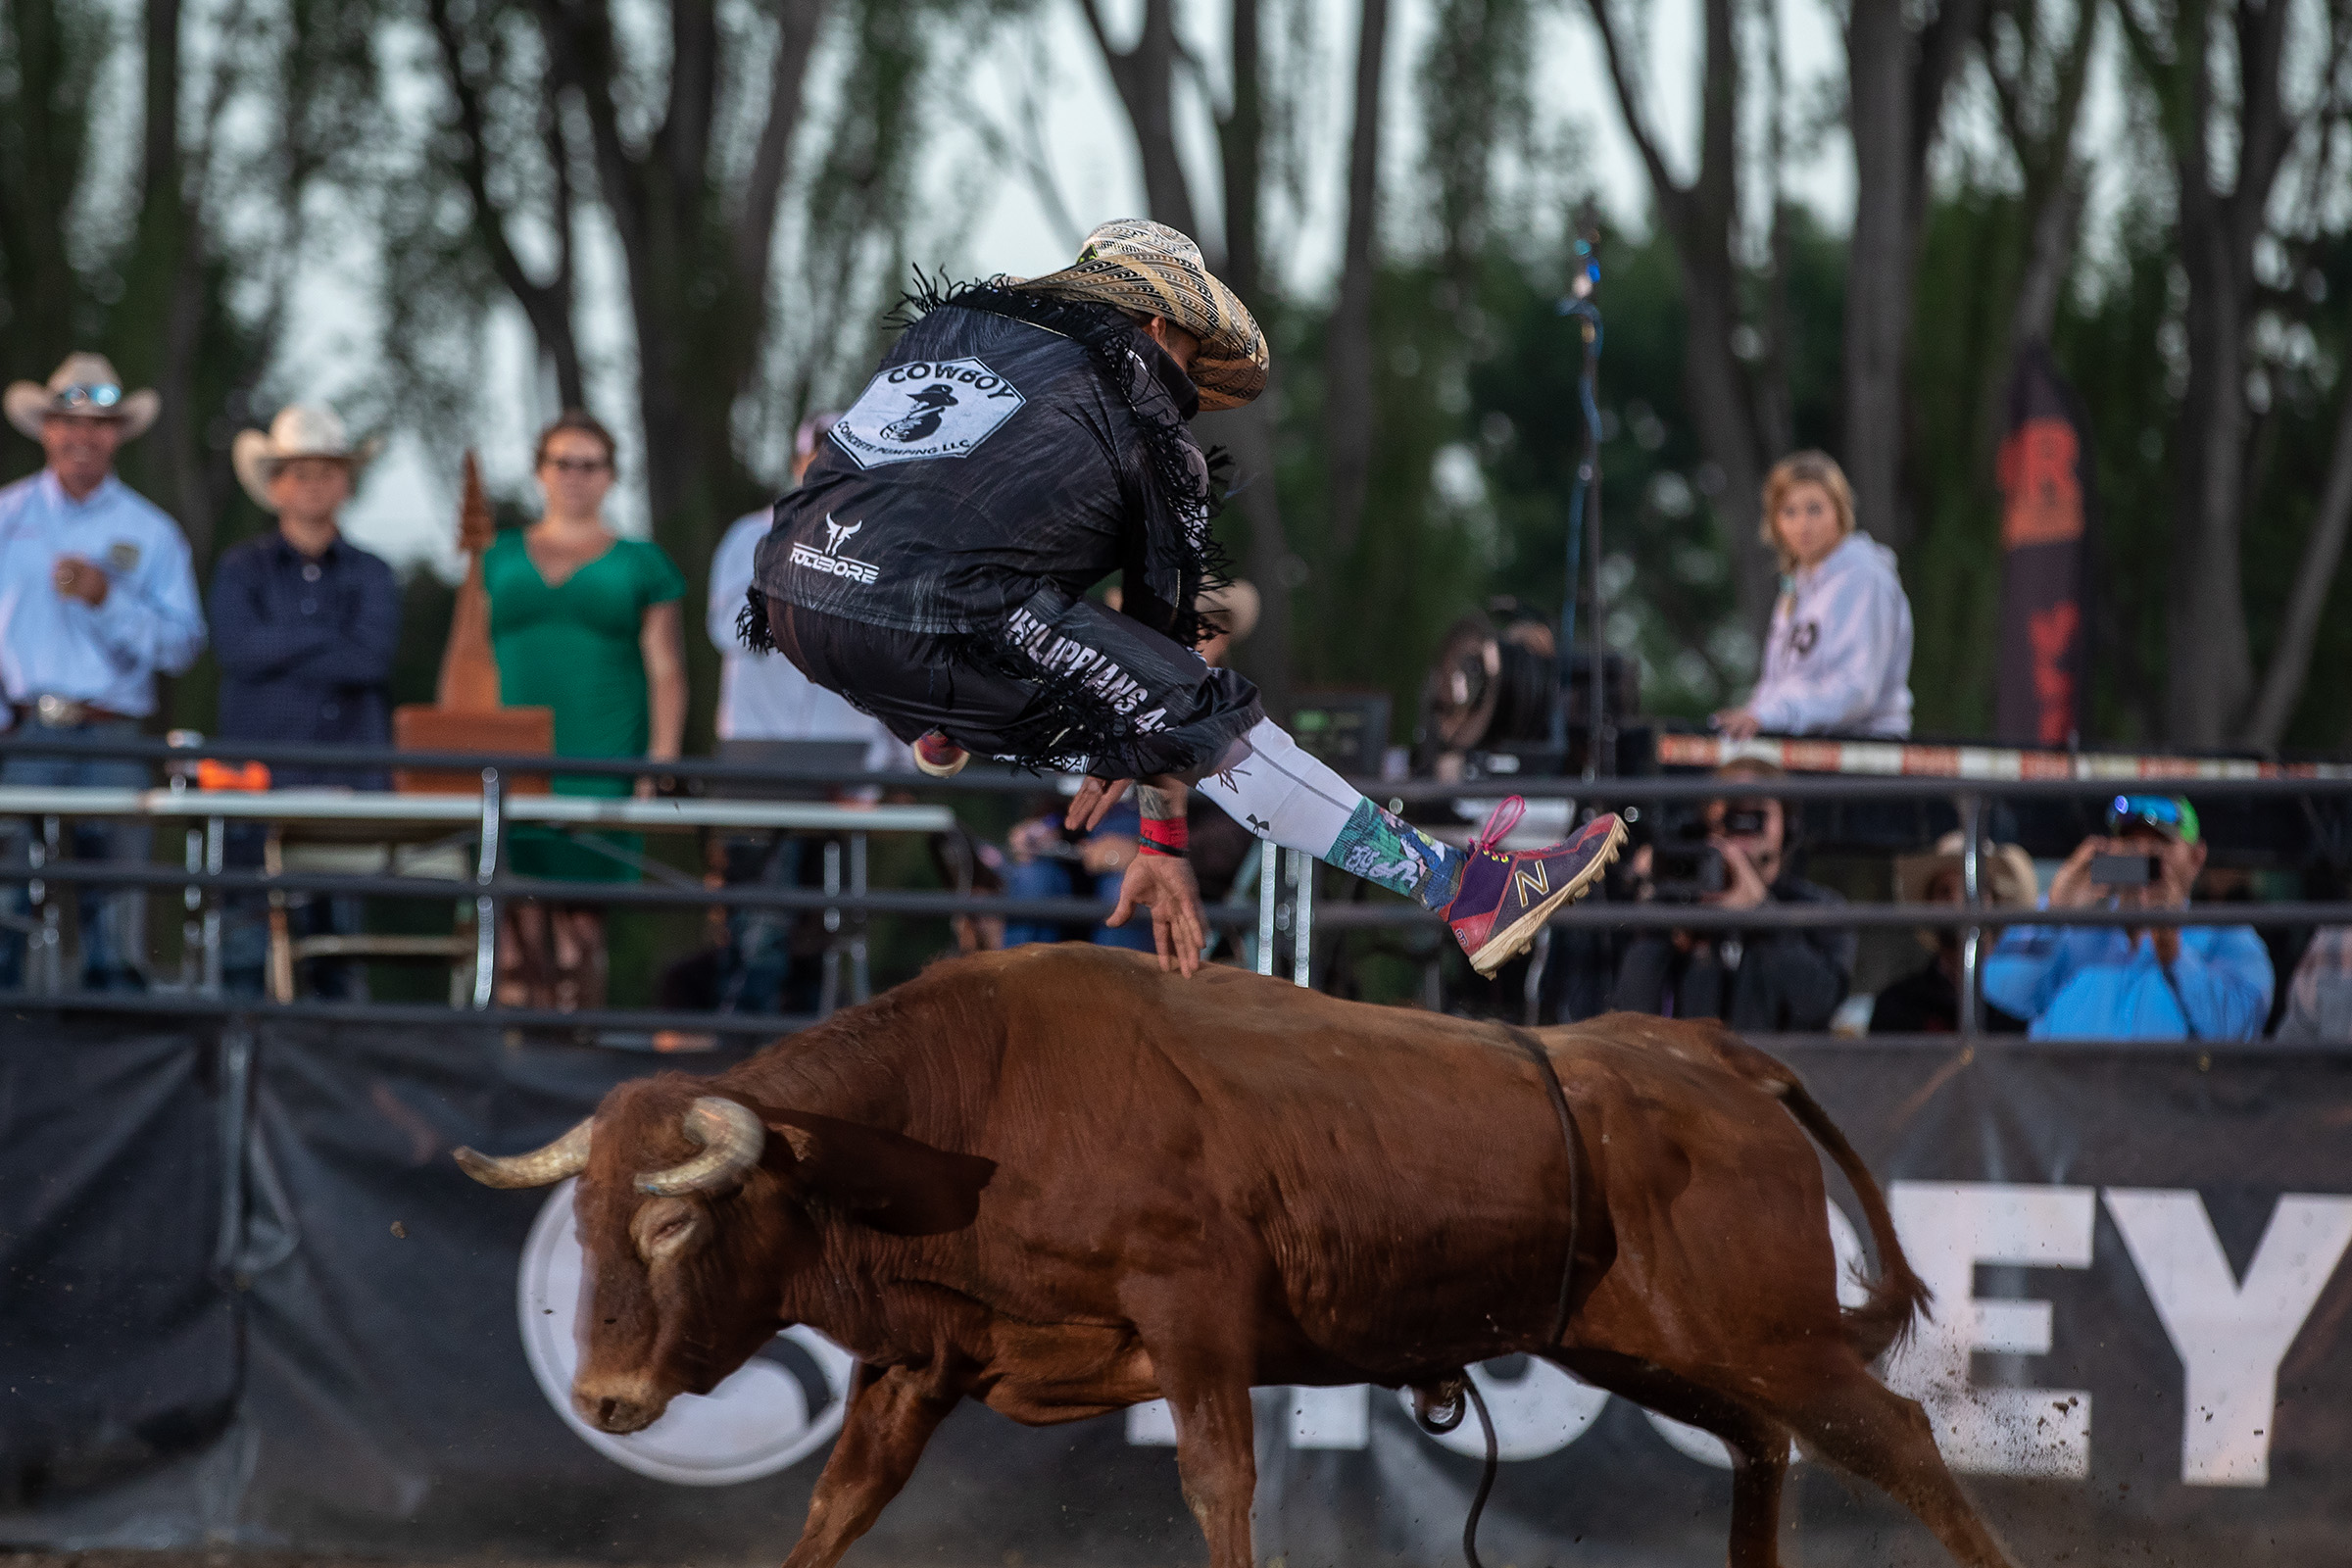 Andres "Sasquatch" Gonzalez leaped into the No. 5 position in the Bullfighters Only Pendleton Whisky World Standings after winning the Sequoia Cup in Fortuna, California. (PHOTO BY TODD BREWER)